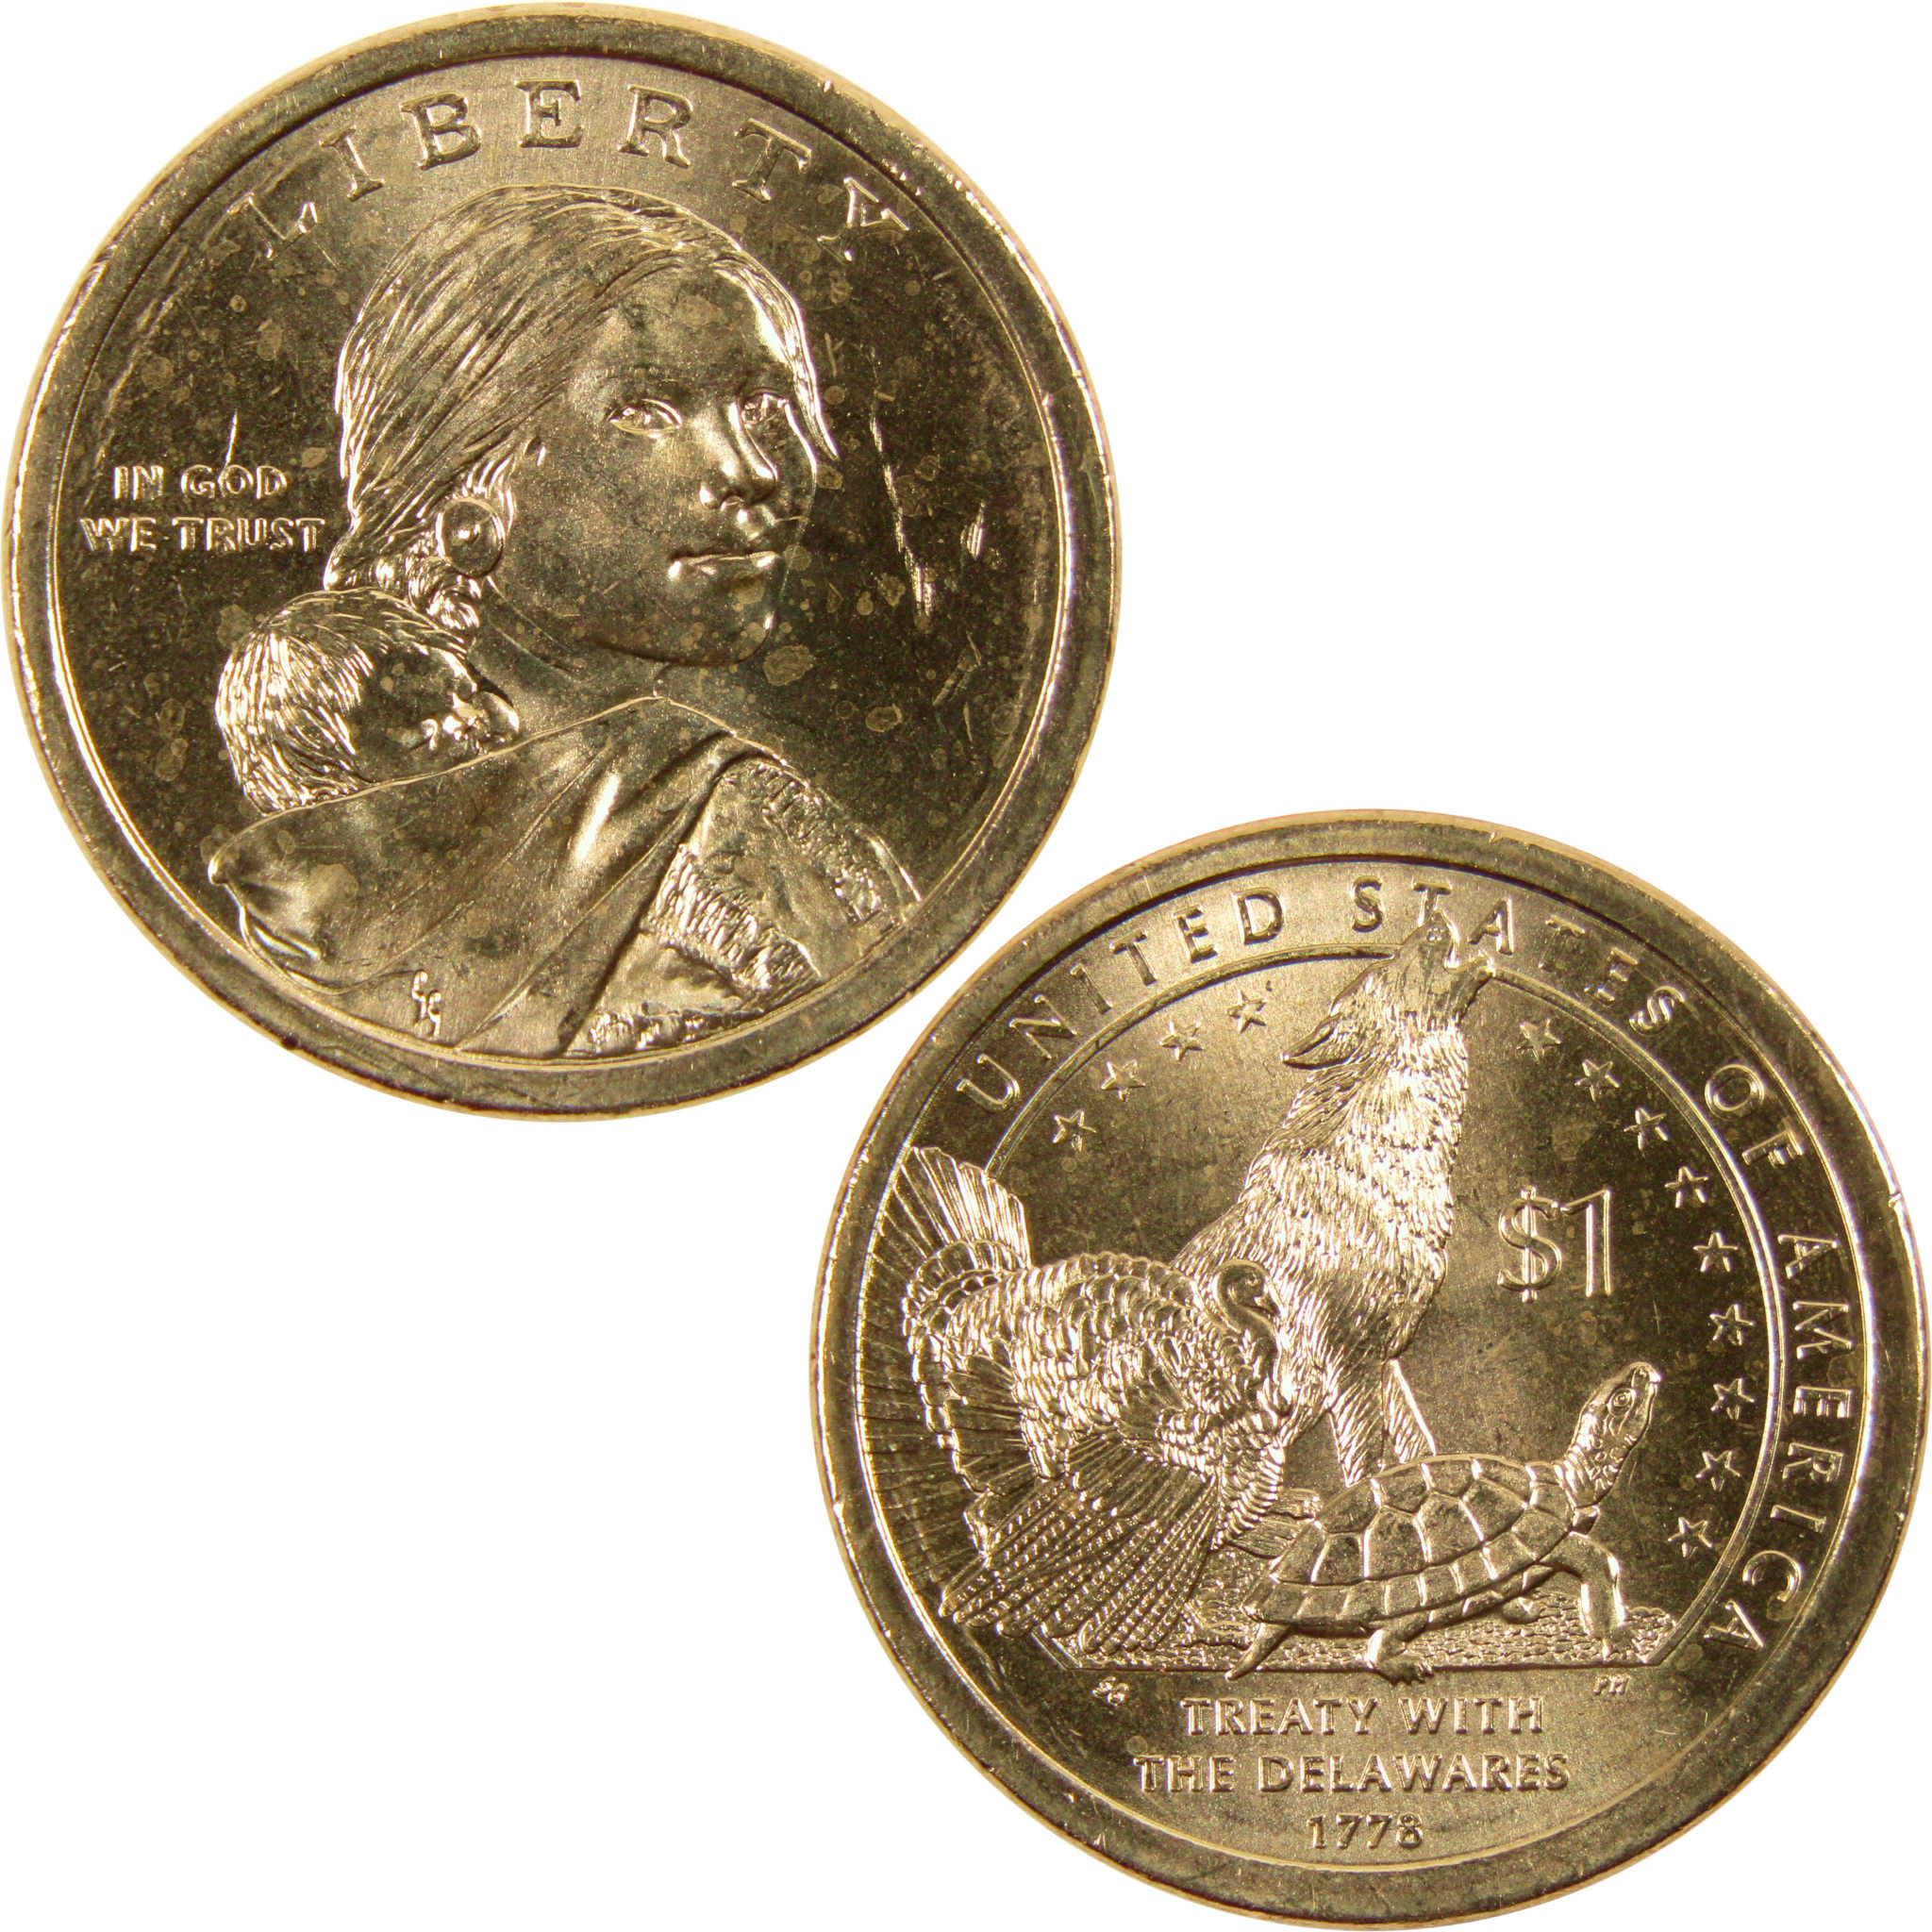 2013 P Treaty with the Delawares Native American Dollar Uncirculated